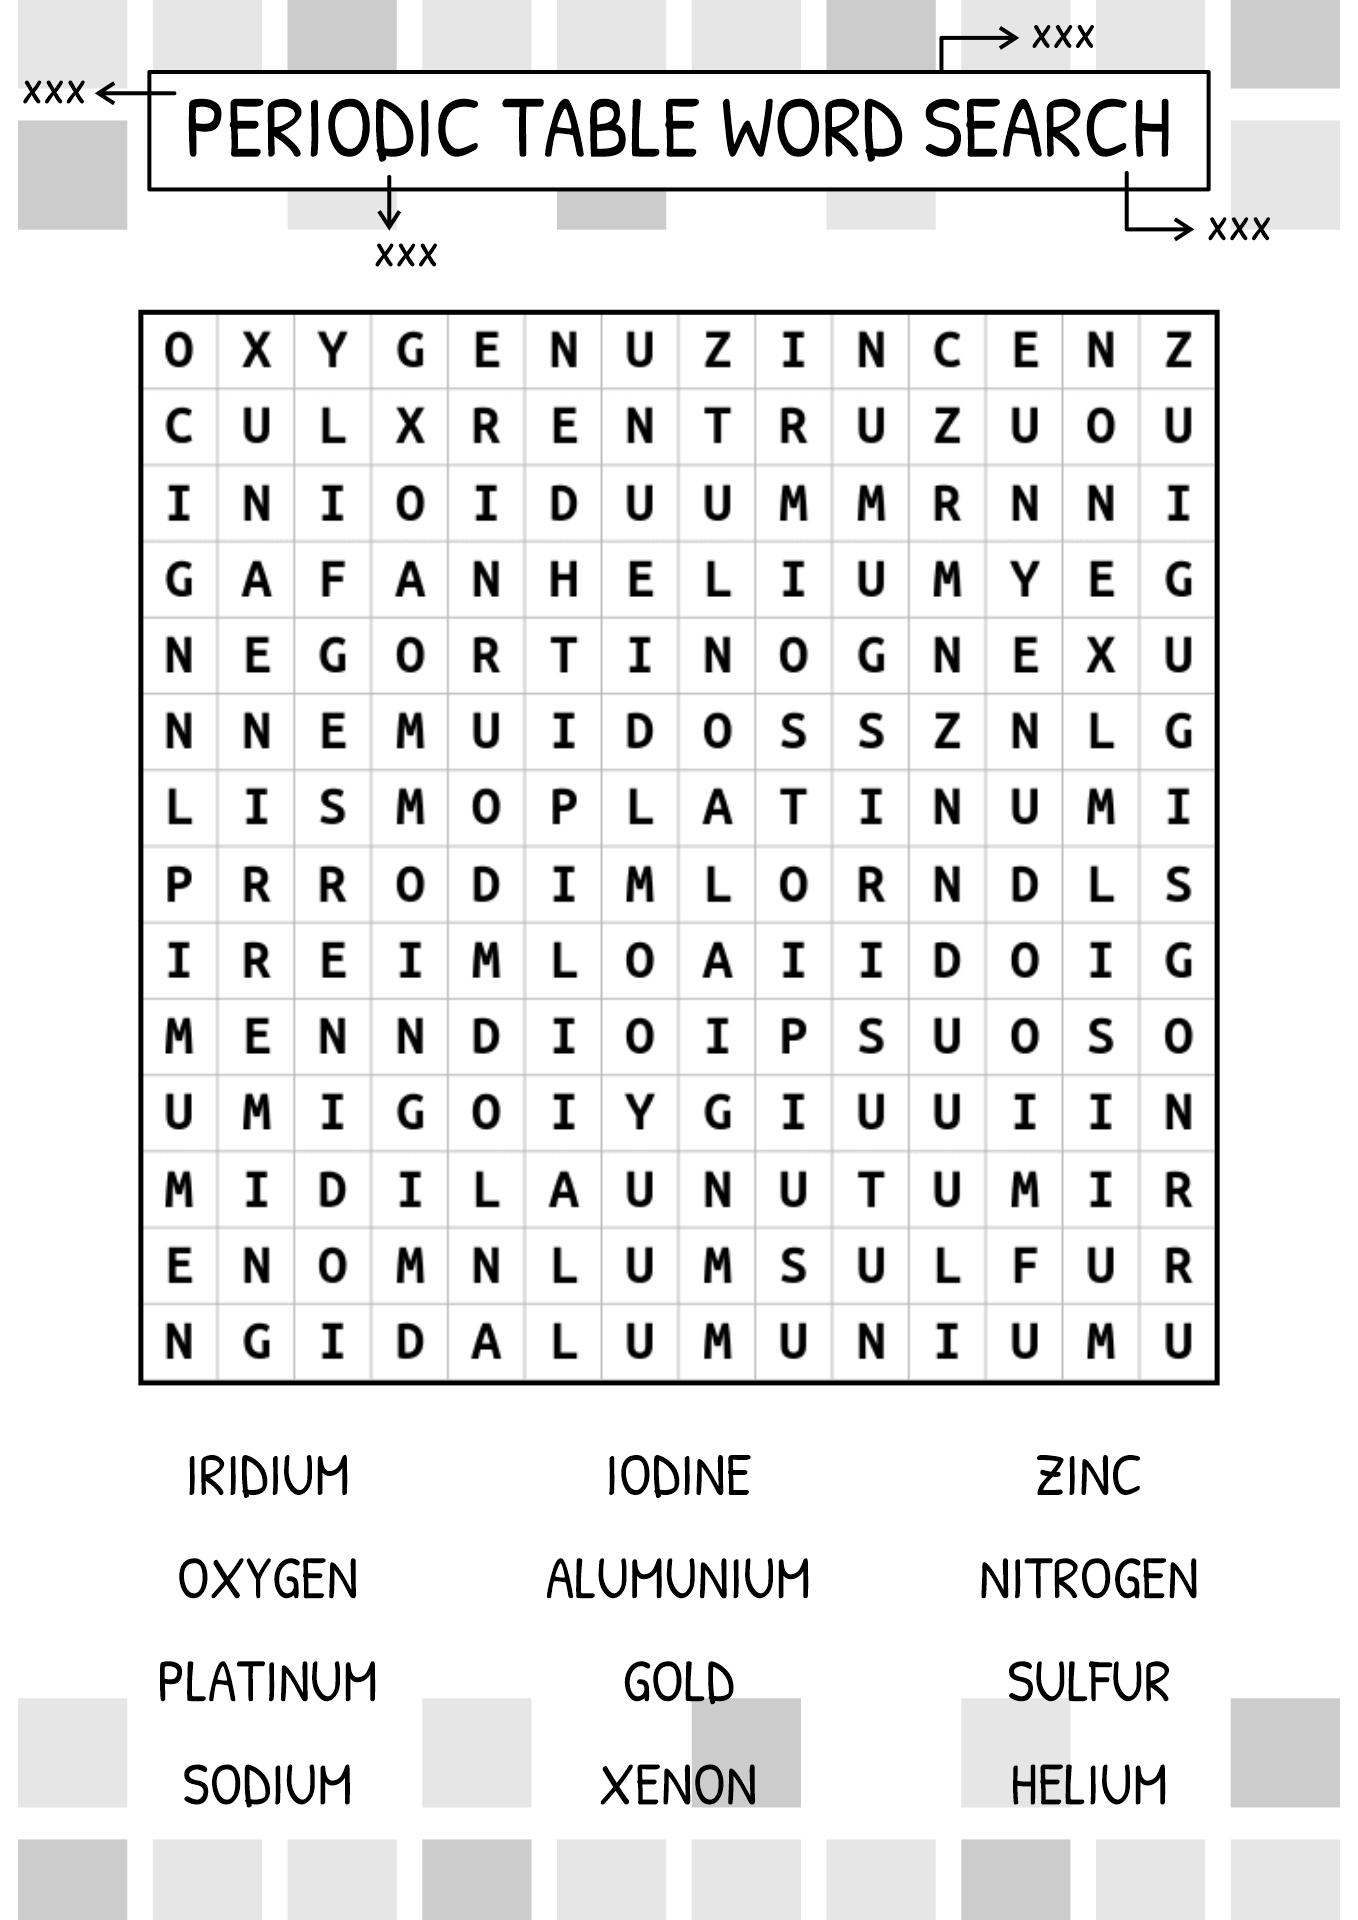 Periodic Table of Elements Word Search Puzzle